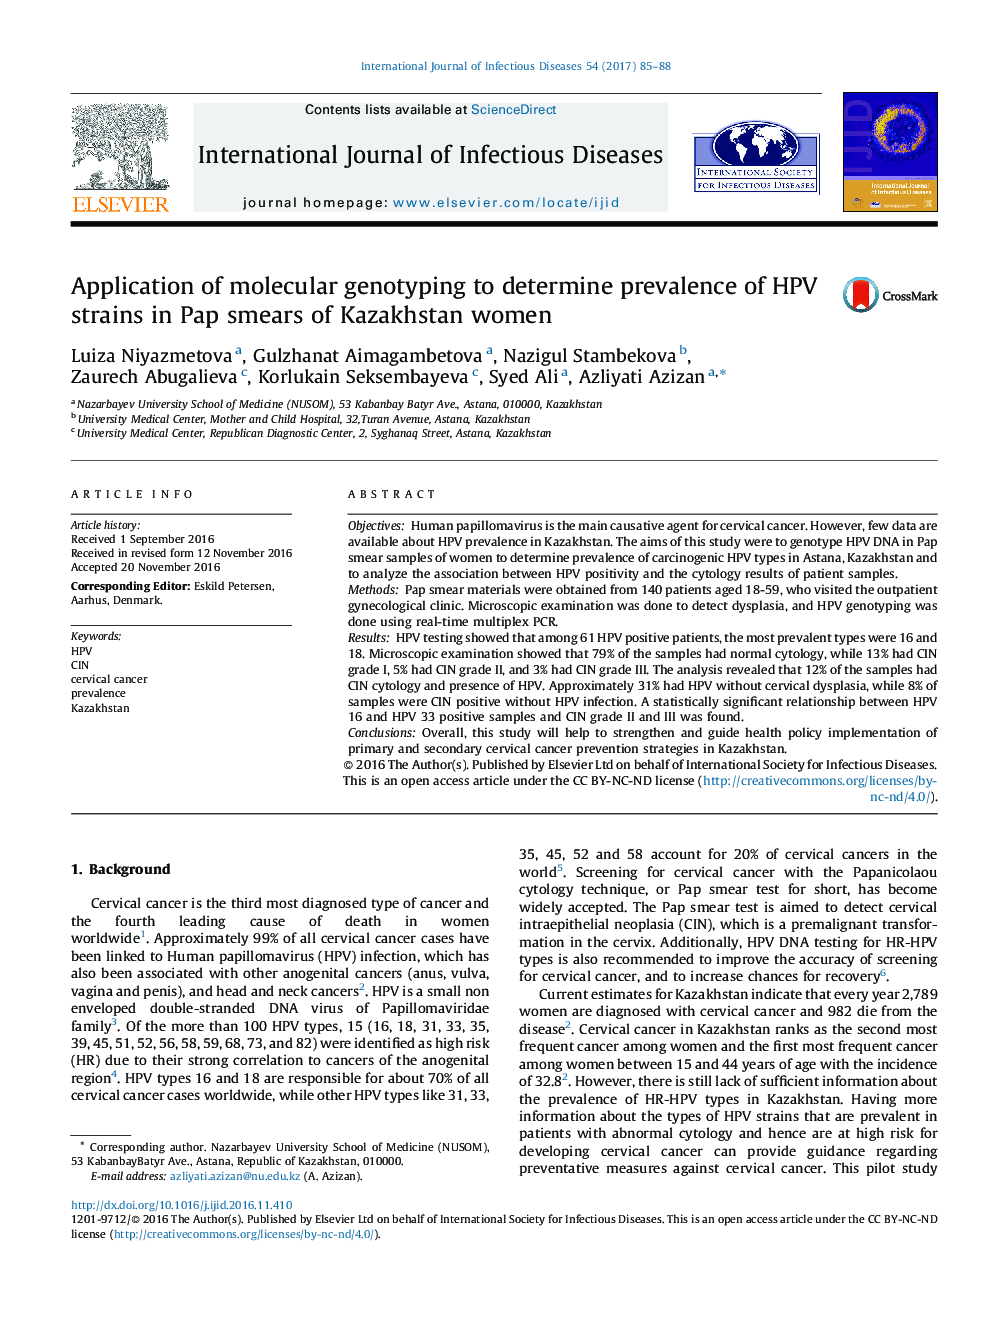 Application of molecular genotyping to determine prevalence of HPV strains in Pap smears of Kazakhstan women